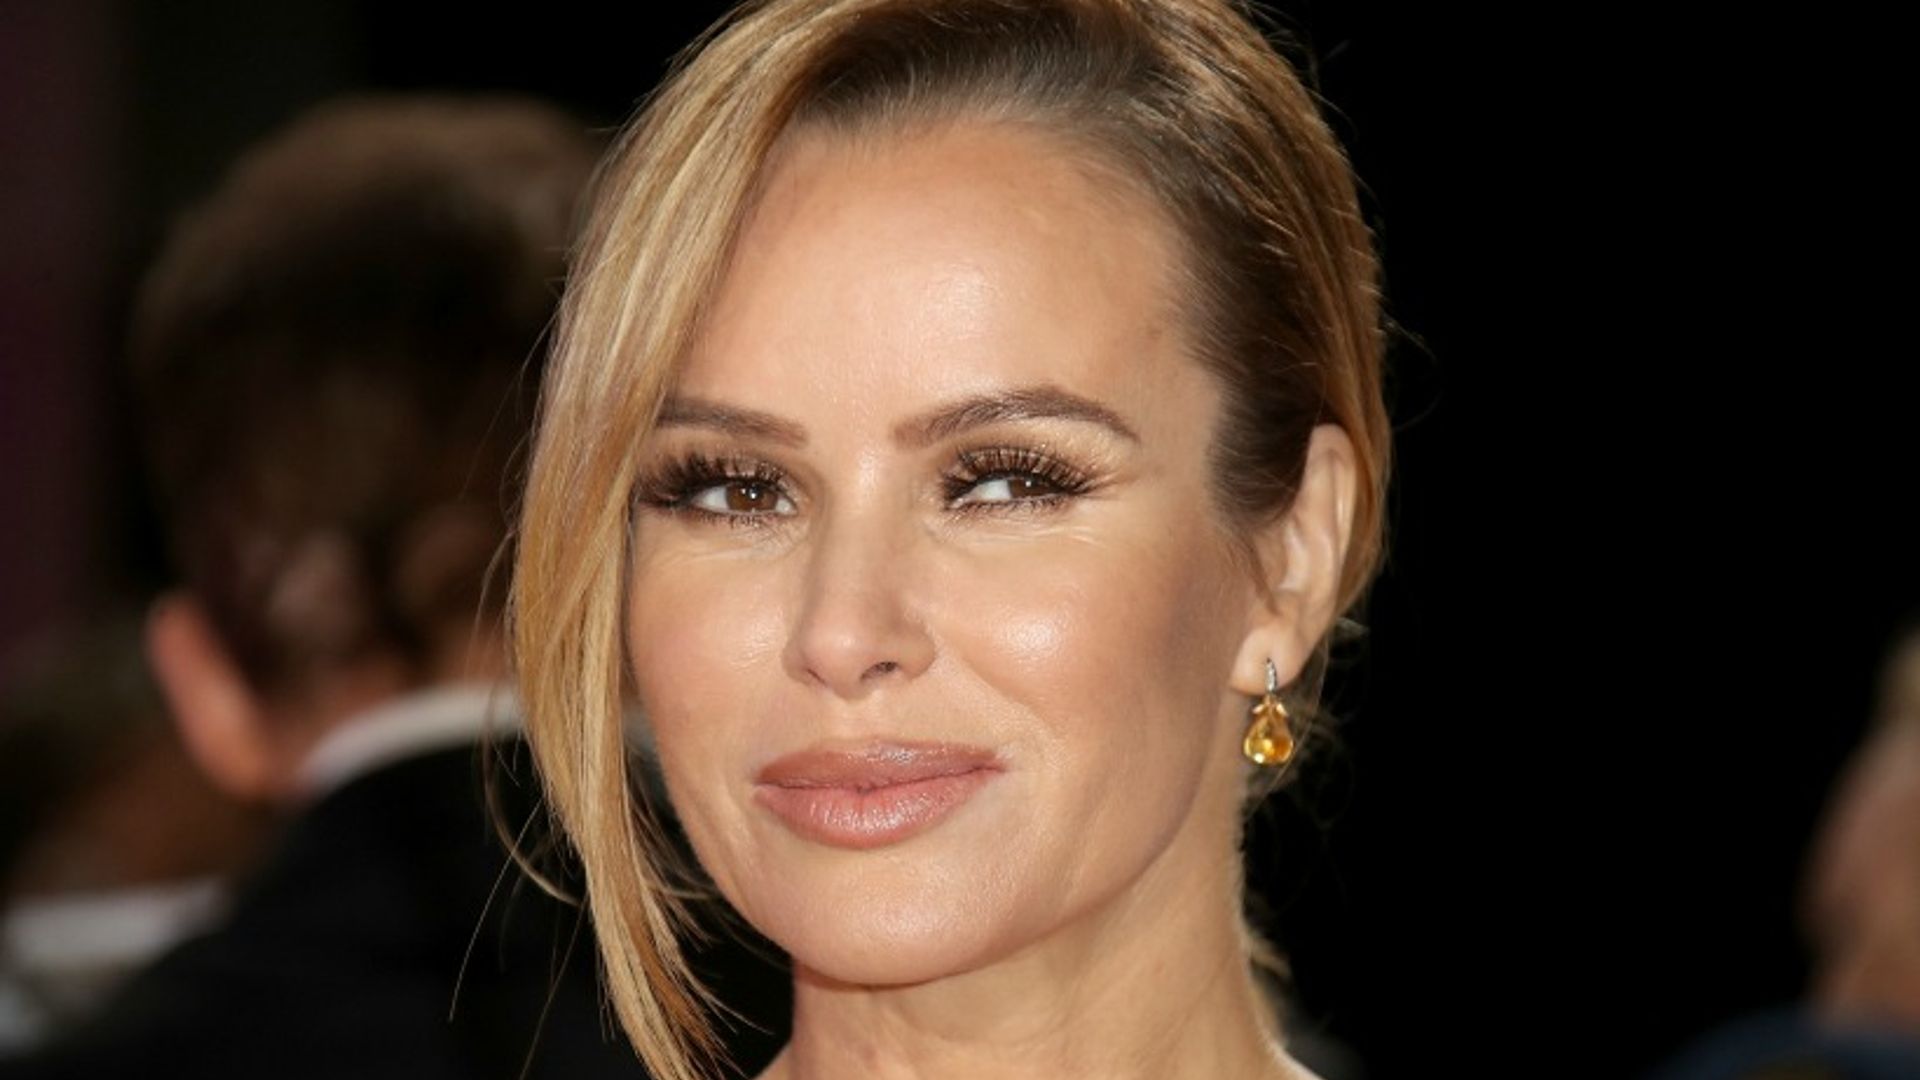 Amanda Holden recycled one of her favourite dresses for the Pride of Britain awards